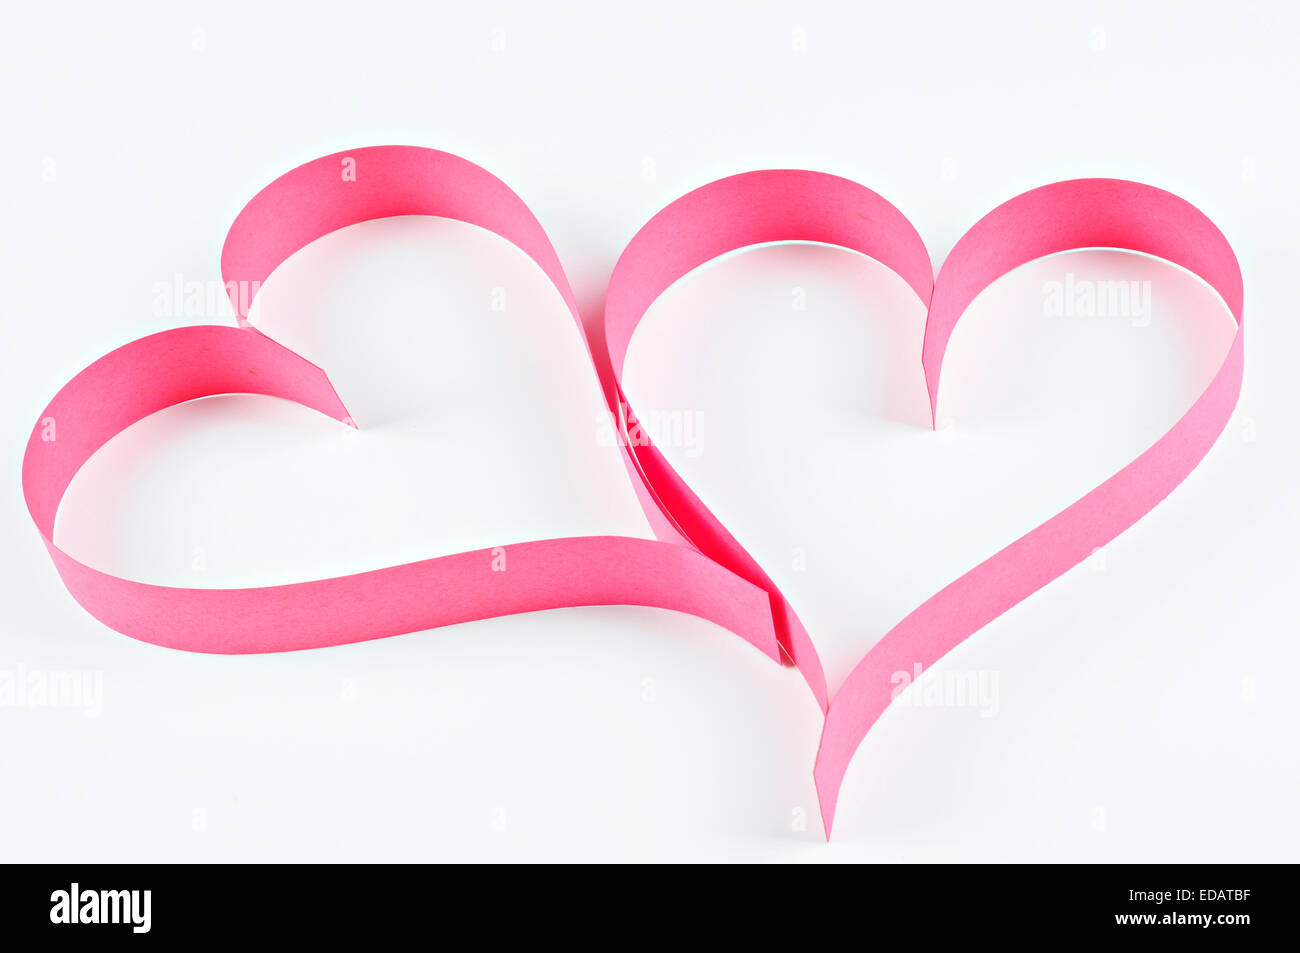 Red hearts made of paper; Valentine's Day concept Stock Photo